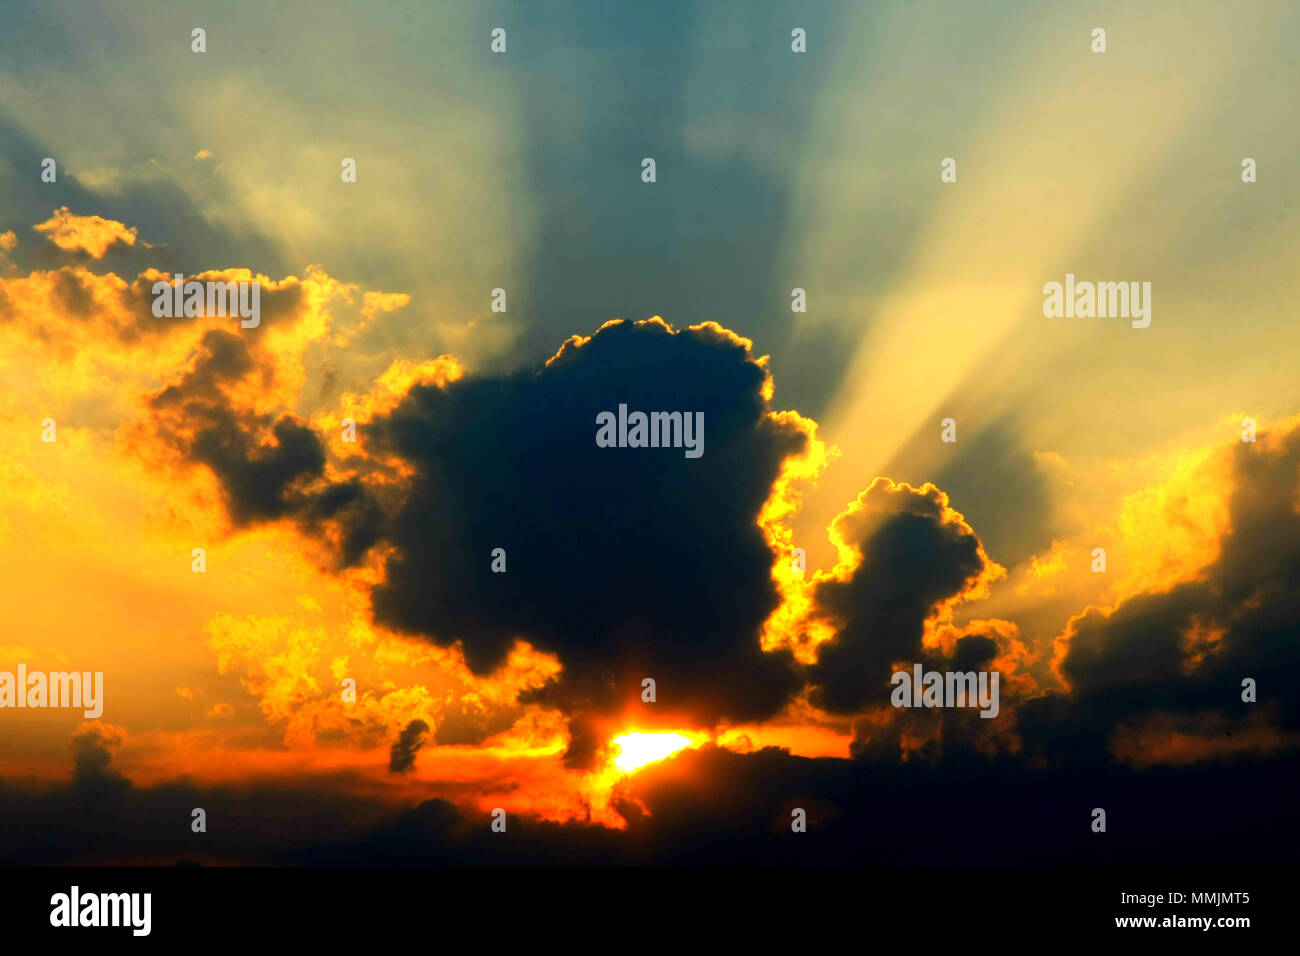 Beautiful sunset with sunbeam, sunray through the clouds. Magneficient moments. Stock Photo